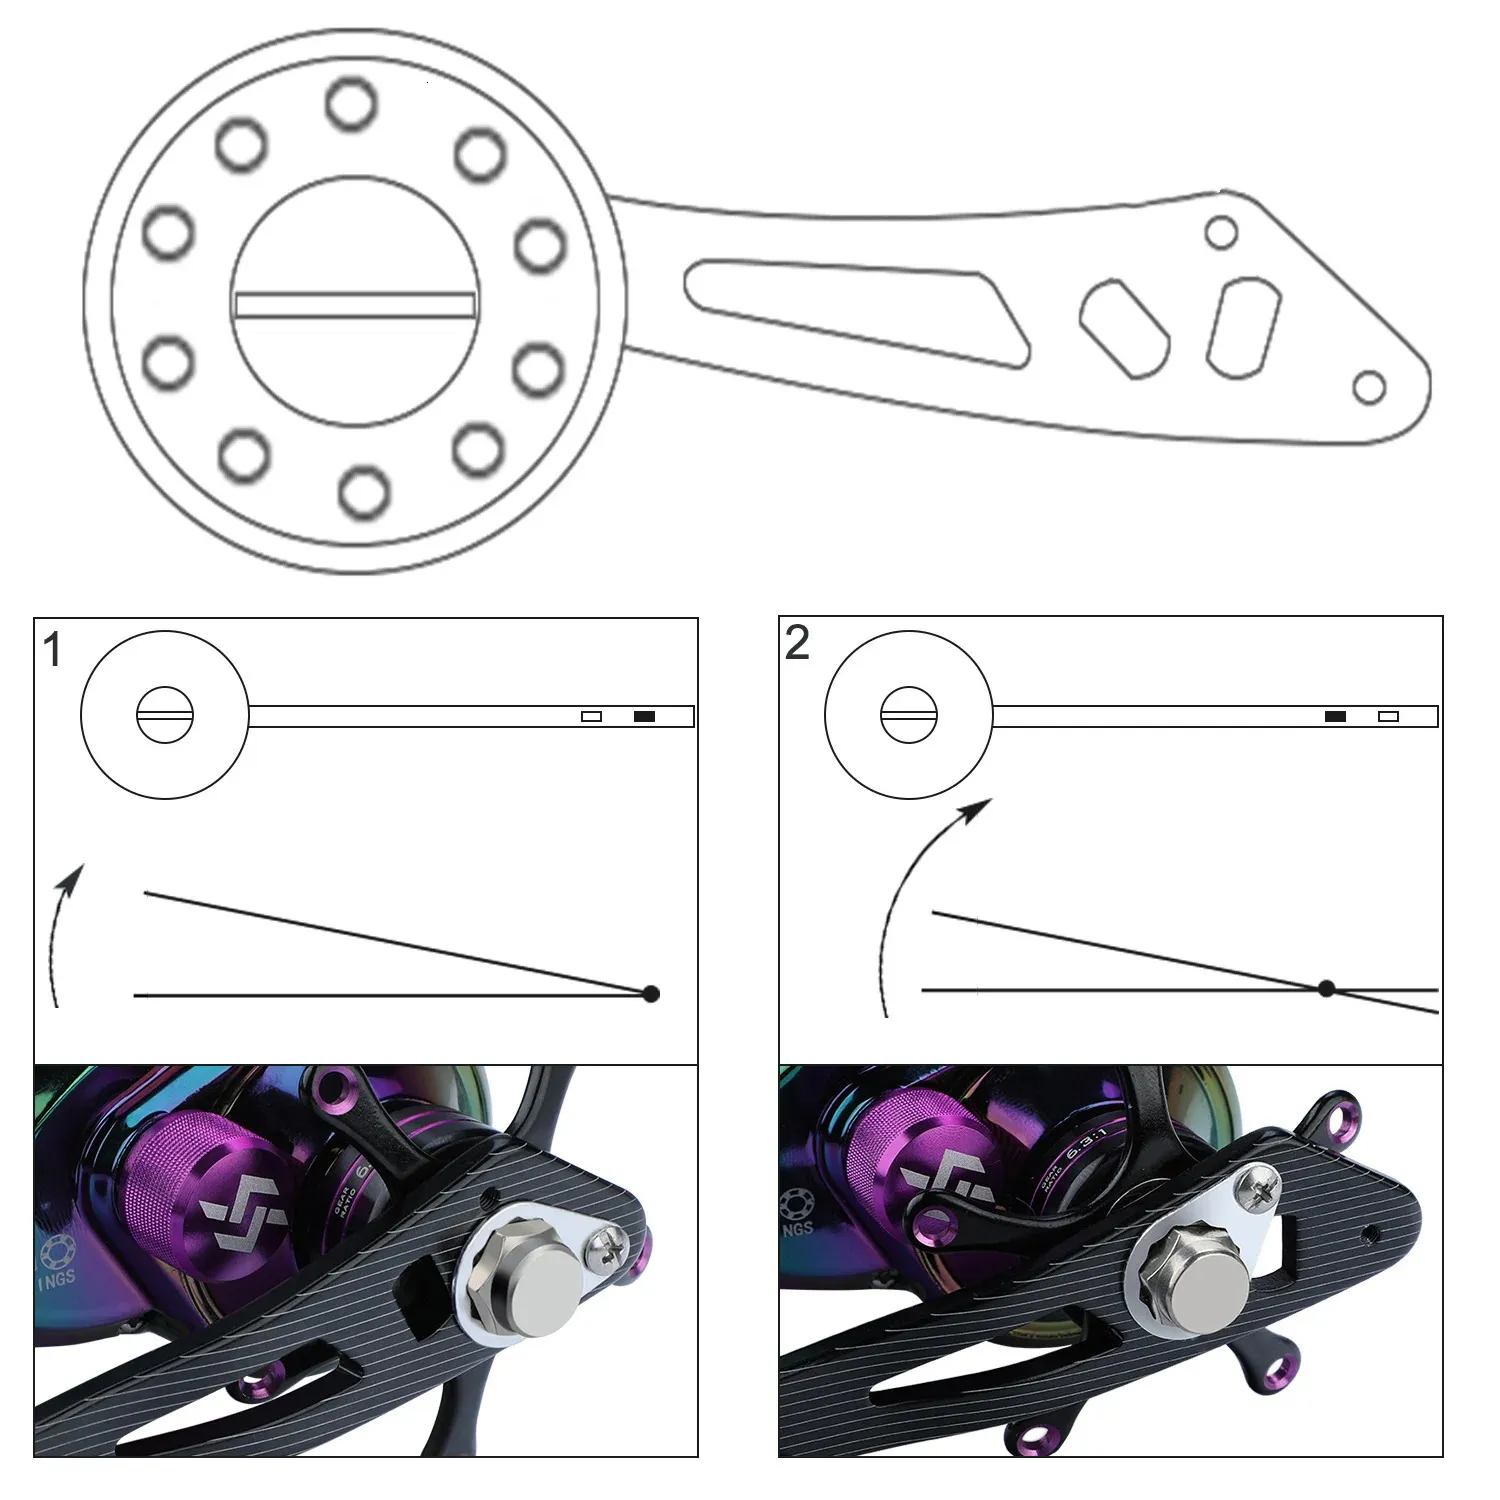 Low Profile Ultralight Baitcasting Reel With Power Handle, Metal Knob, Micro  Jigging Grip, And Fittings Replacement Parts For Bailcasting Fishing Reels  Model 231101 From You09, $8.65